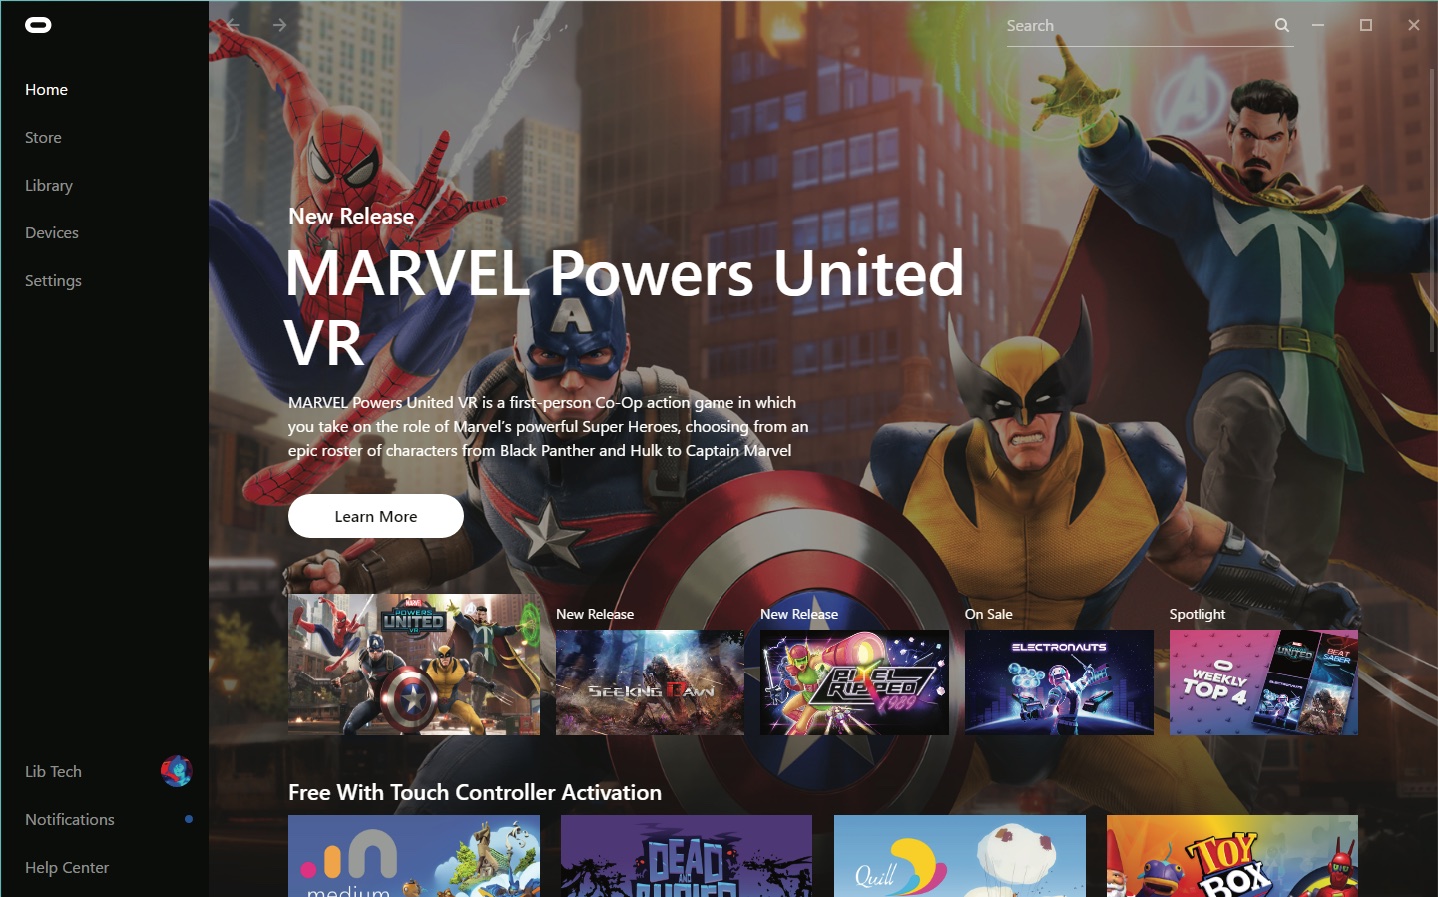 Oculus rift software home - large image of marvel powers united vr with several other apps located on screen image